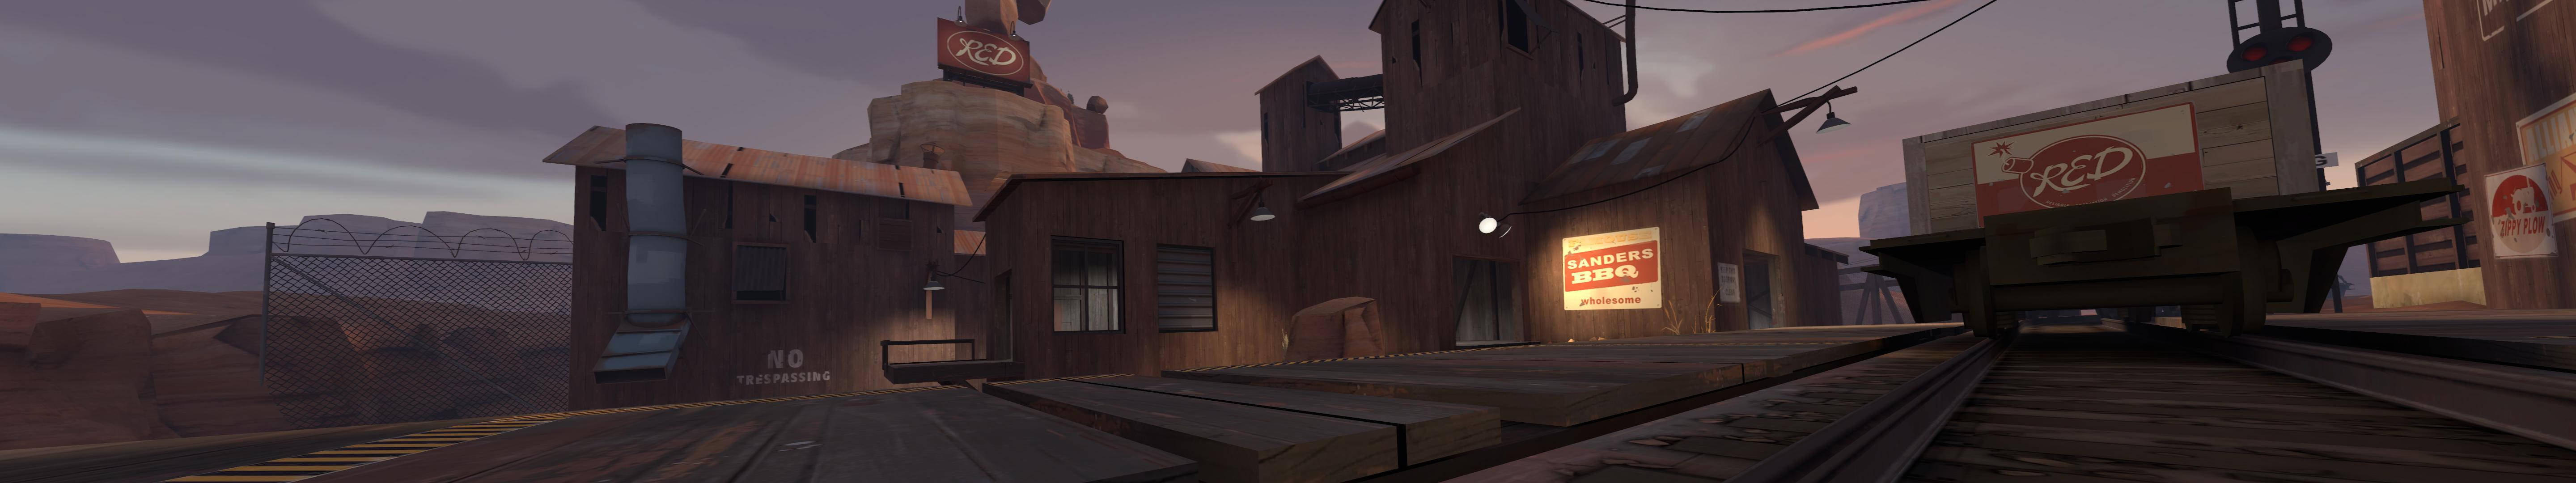 Tf2 Red Industrial Railroad Background